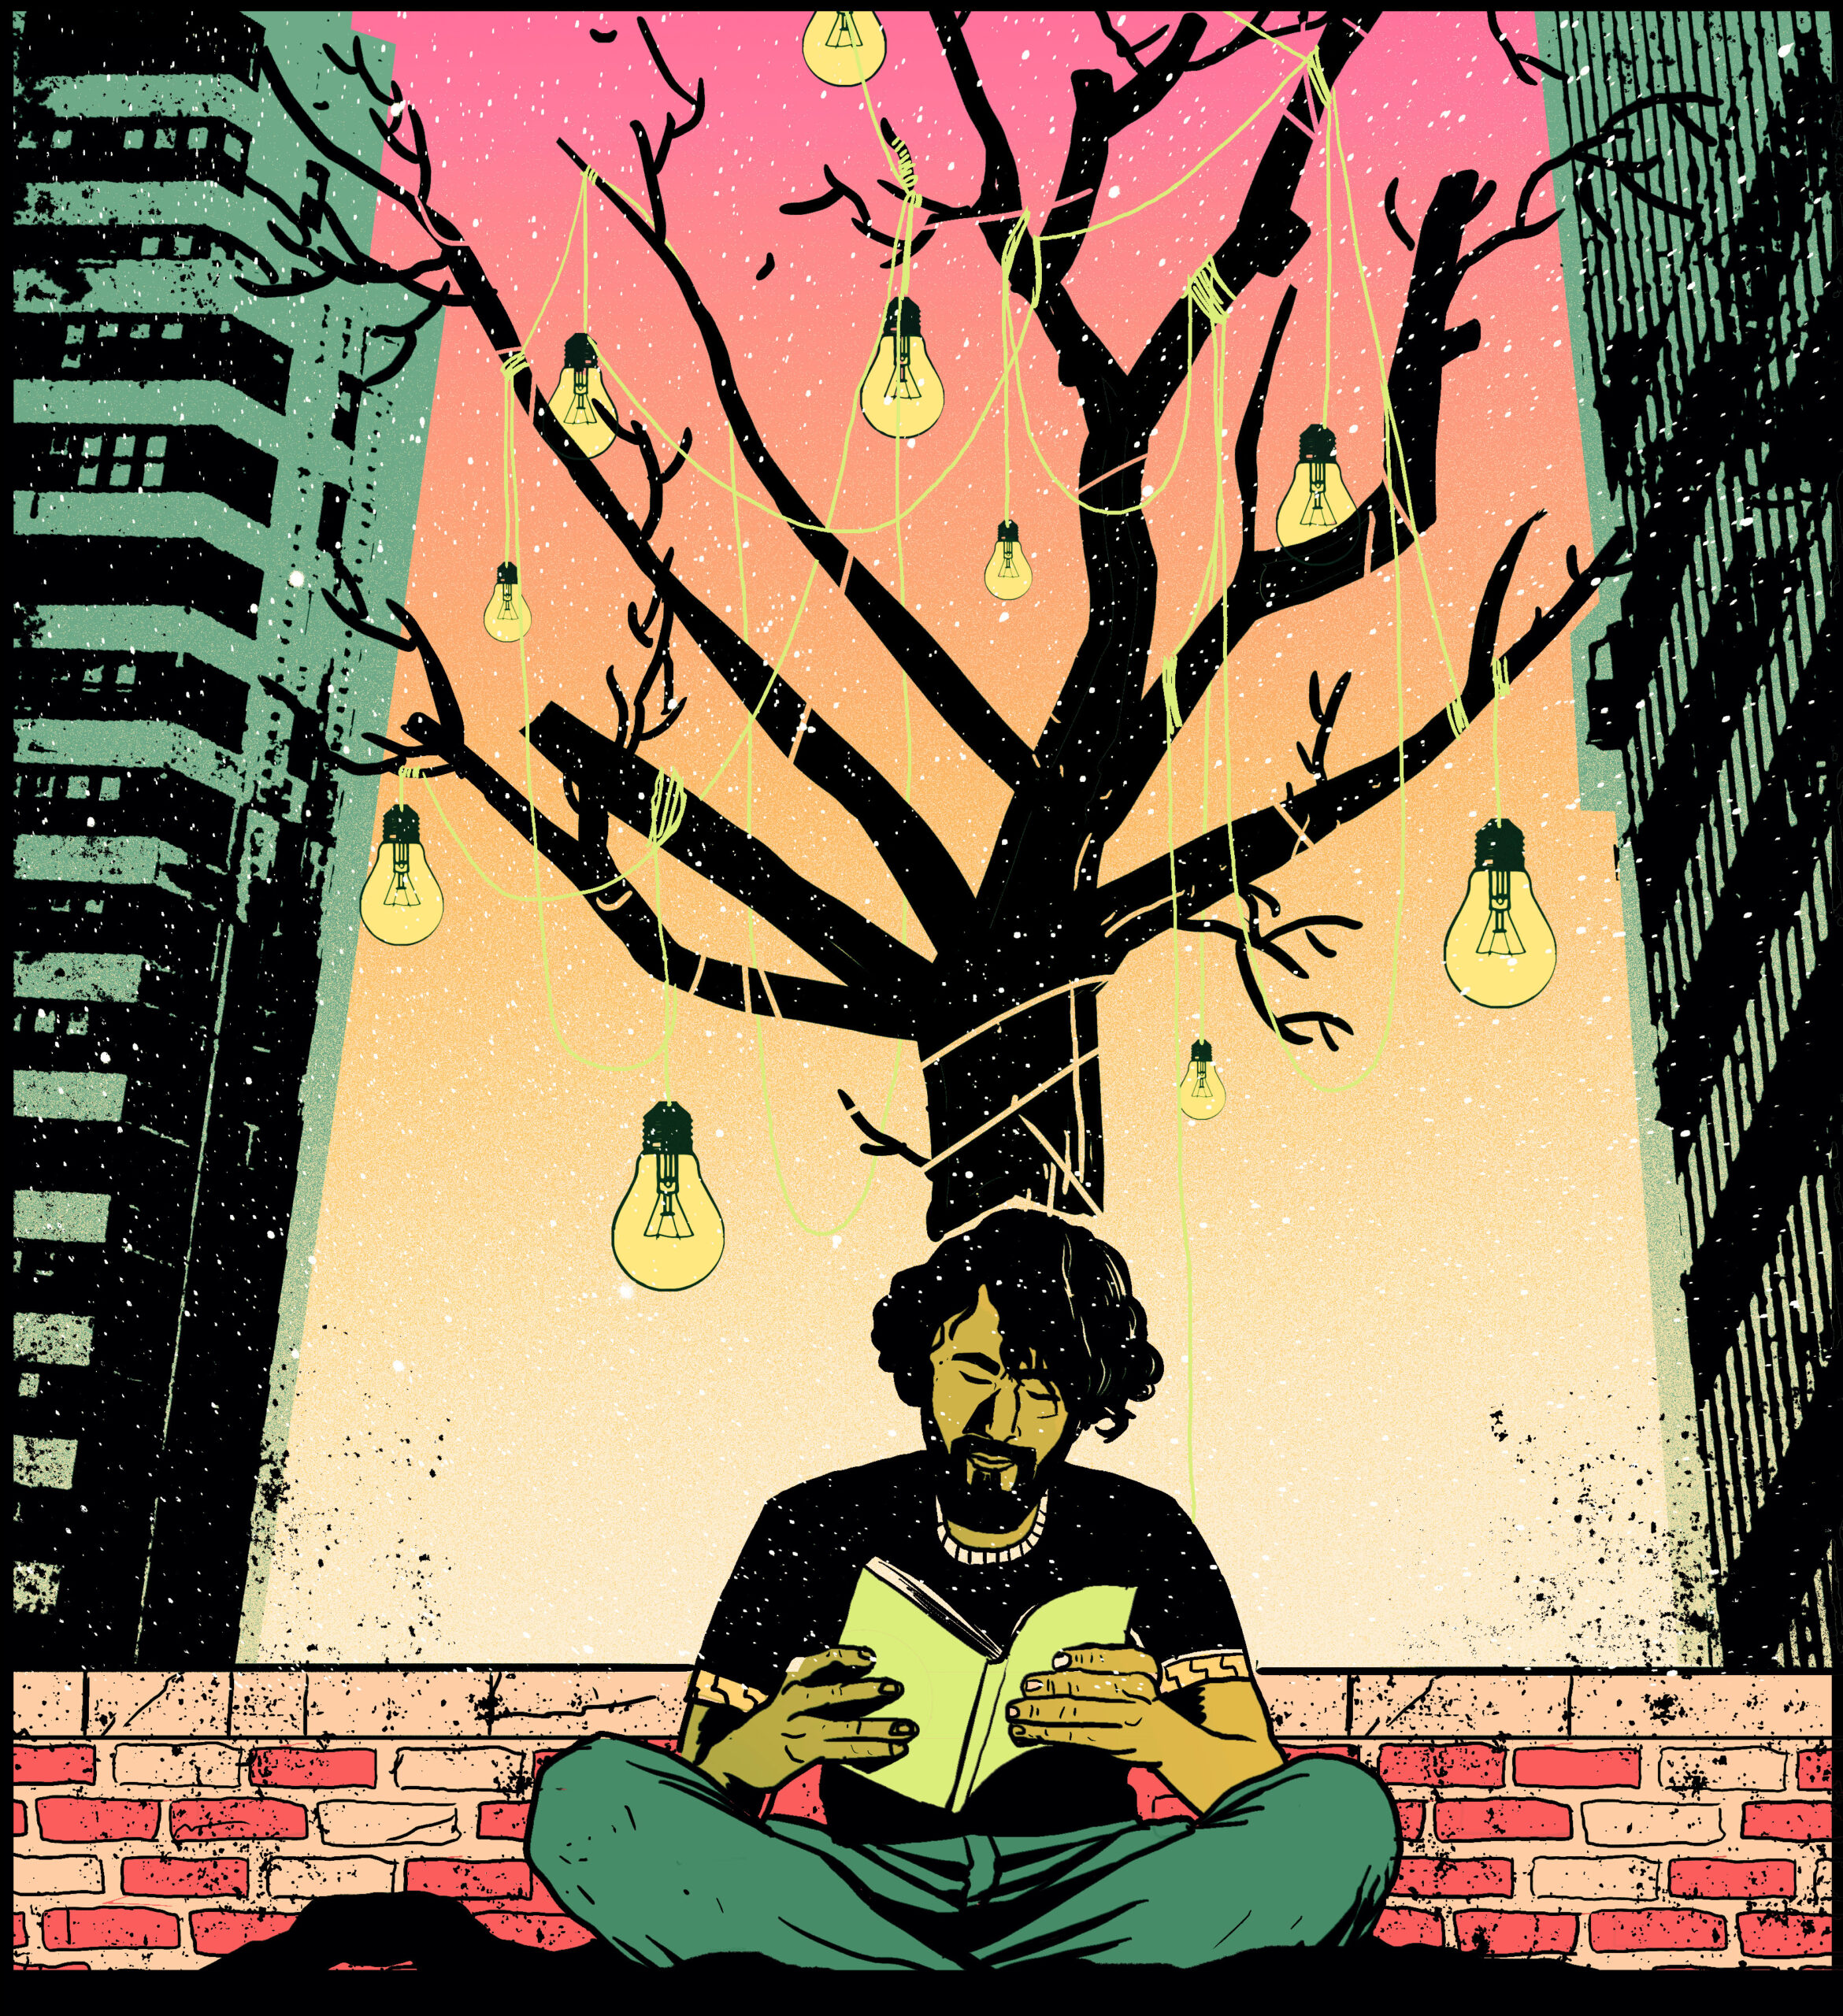 A shaggy-haired man in blue jeans reads a book beneath a tree filled with light bulbs.